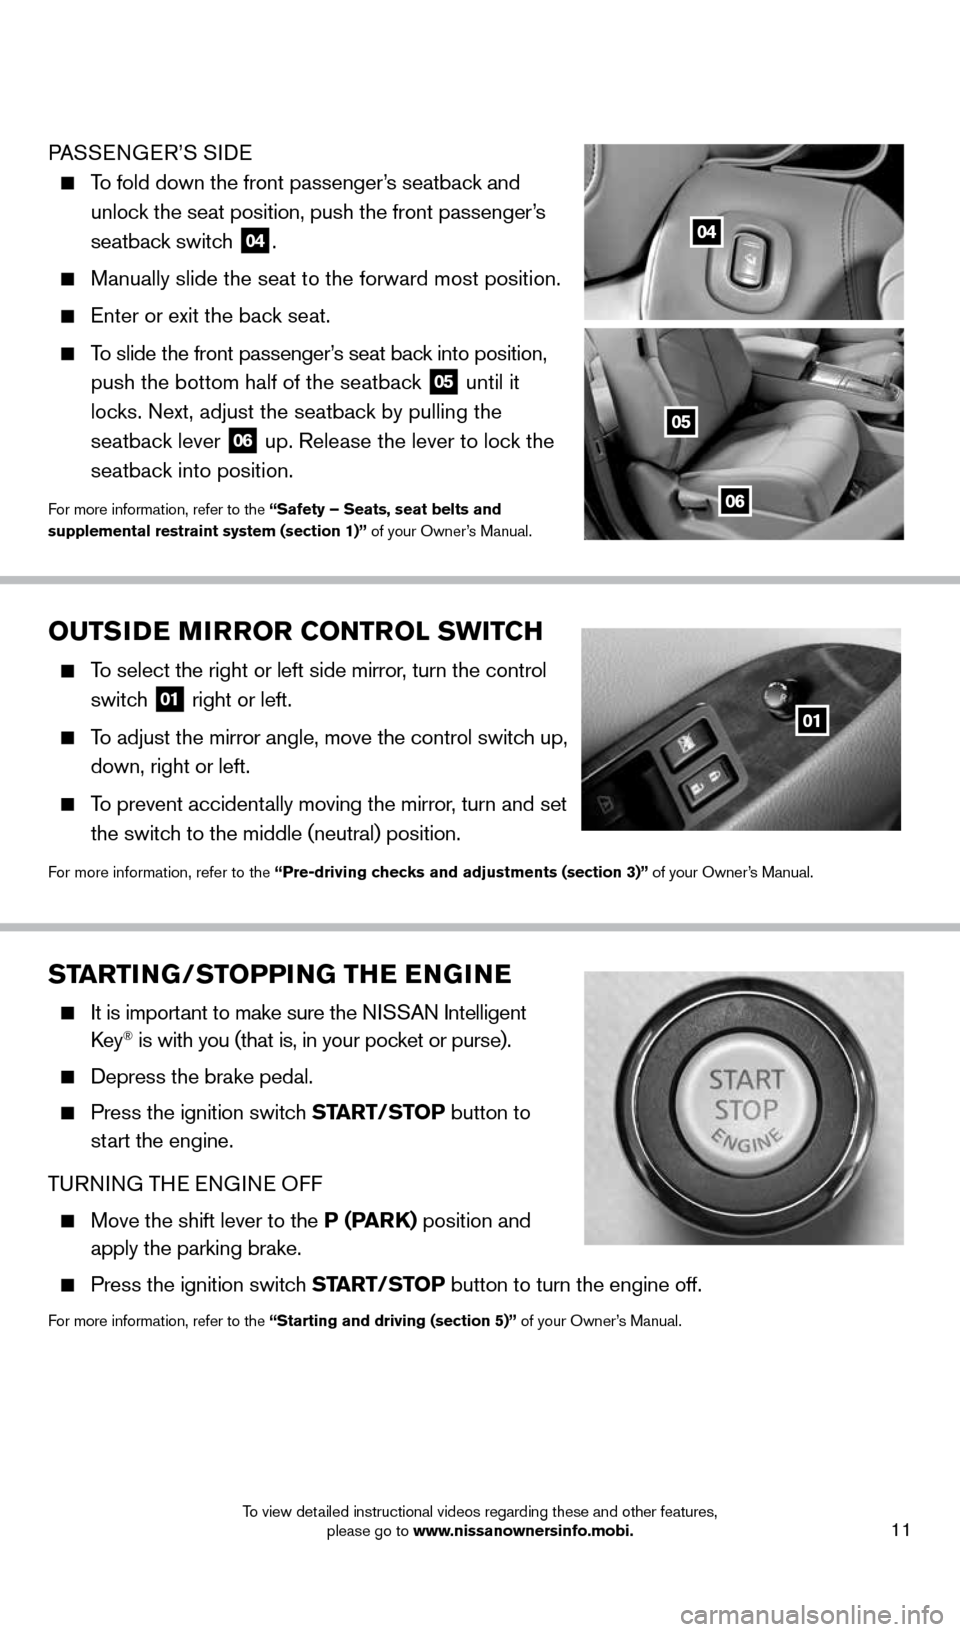 NISSAN MURANO 2014 2.G Quick Reference Guide 11
OUTSIDE MIRROR CONTROL SWITCH
   
To select the right or left side mirror, turn the control   
switch  
01 right or left.
 
   
To adjust the mirror angle, move the control switch up,  
down, right